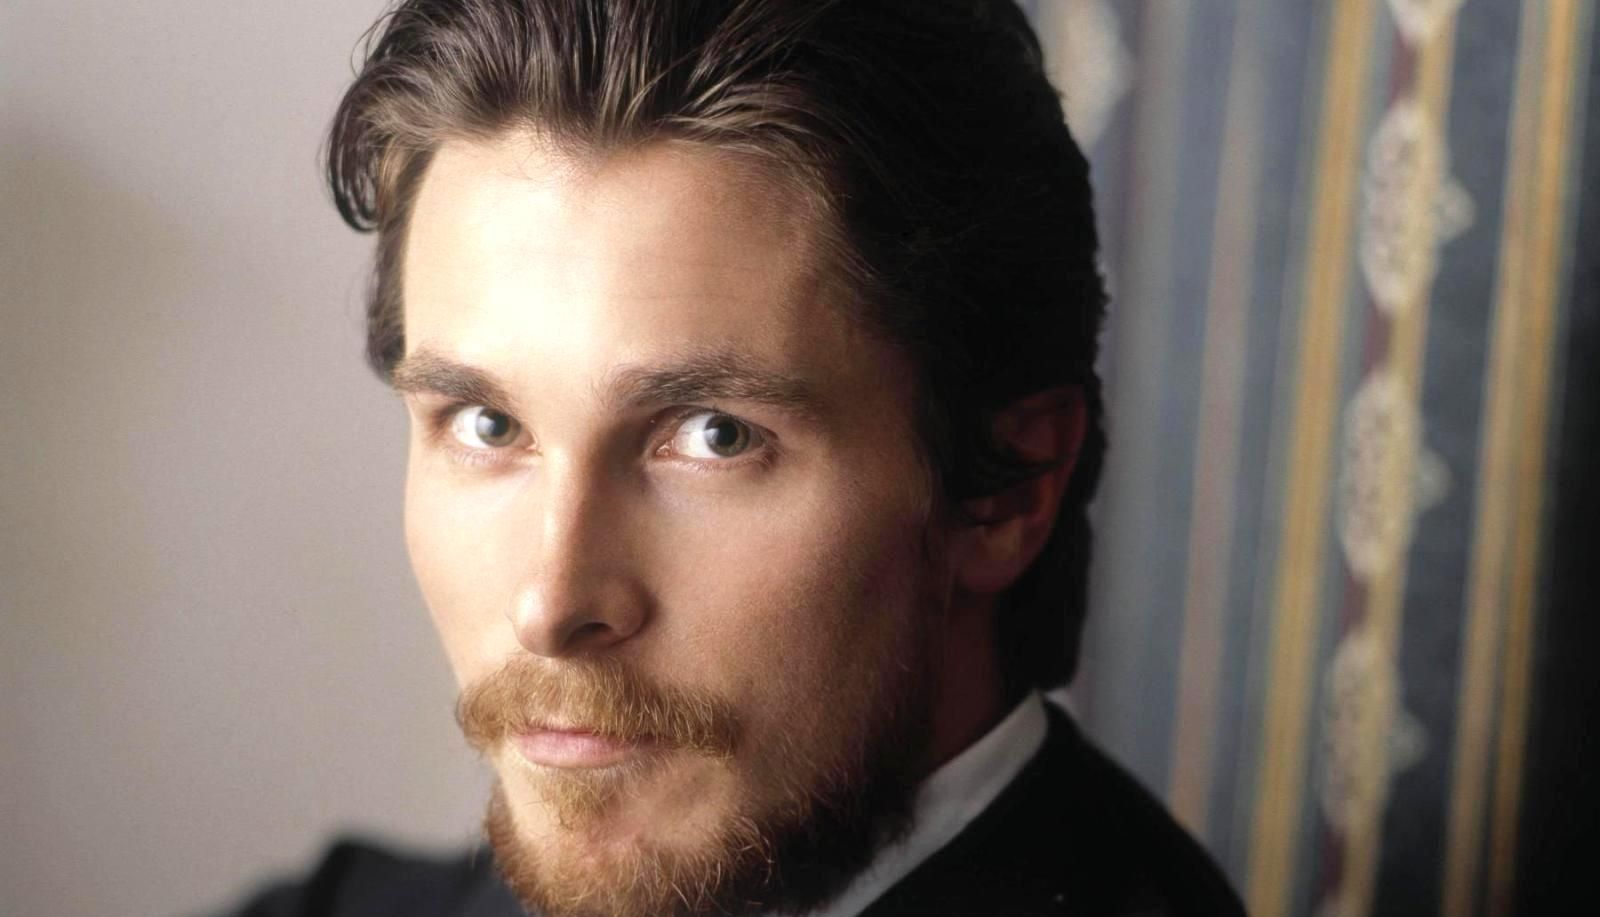 Is Christian Bale being cast as Steve Jobs?